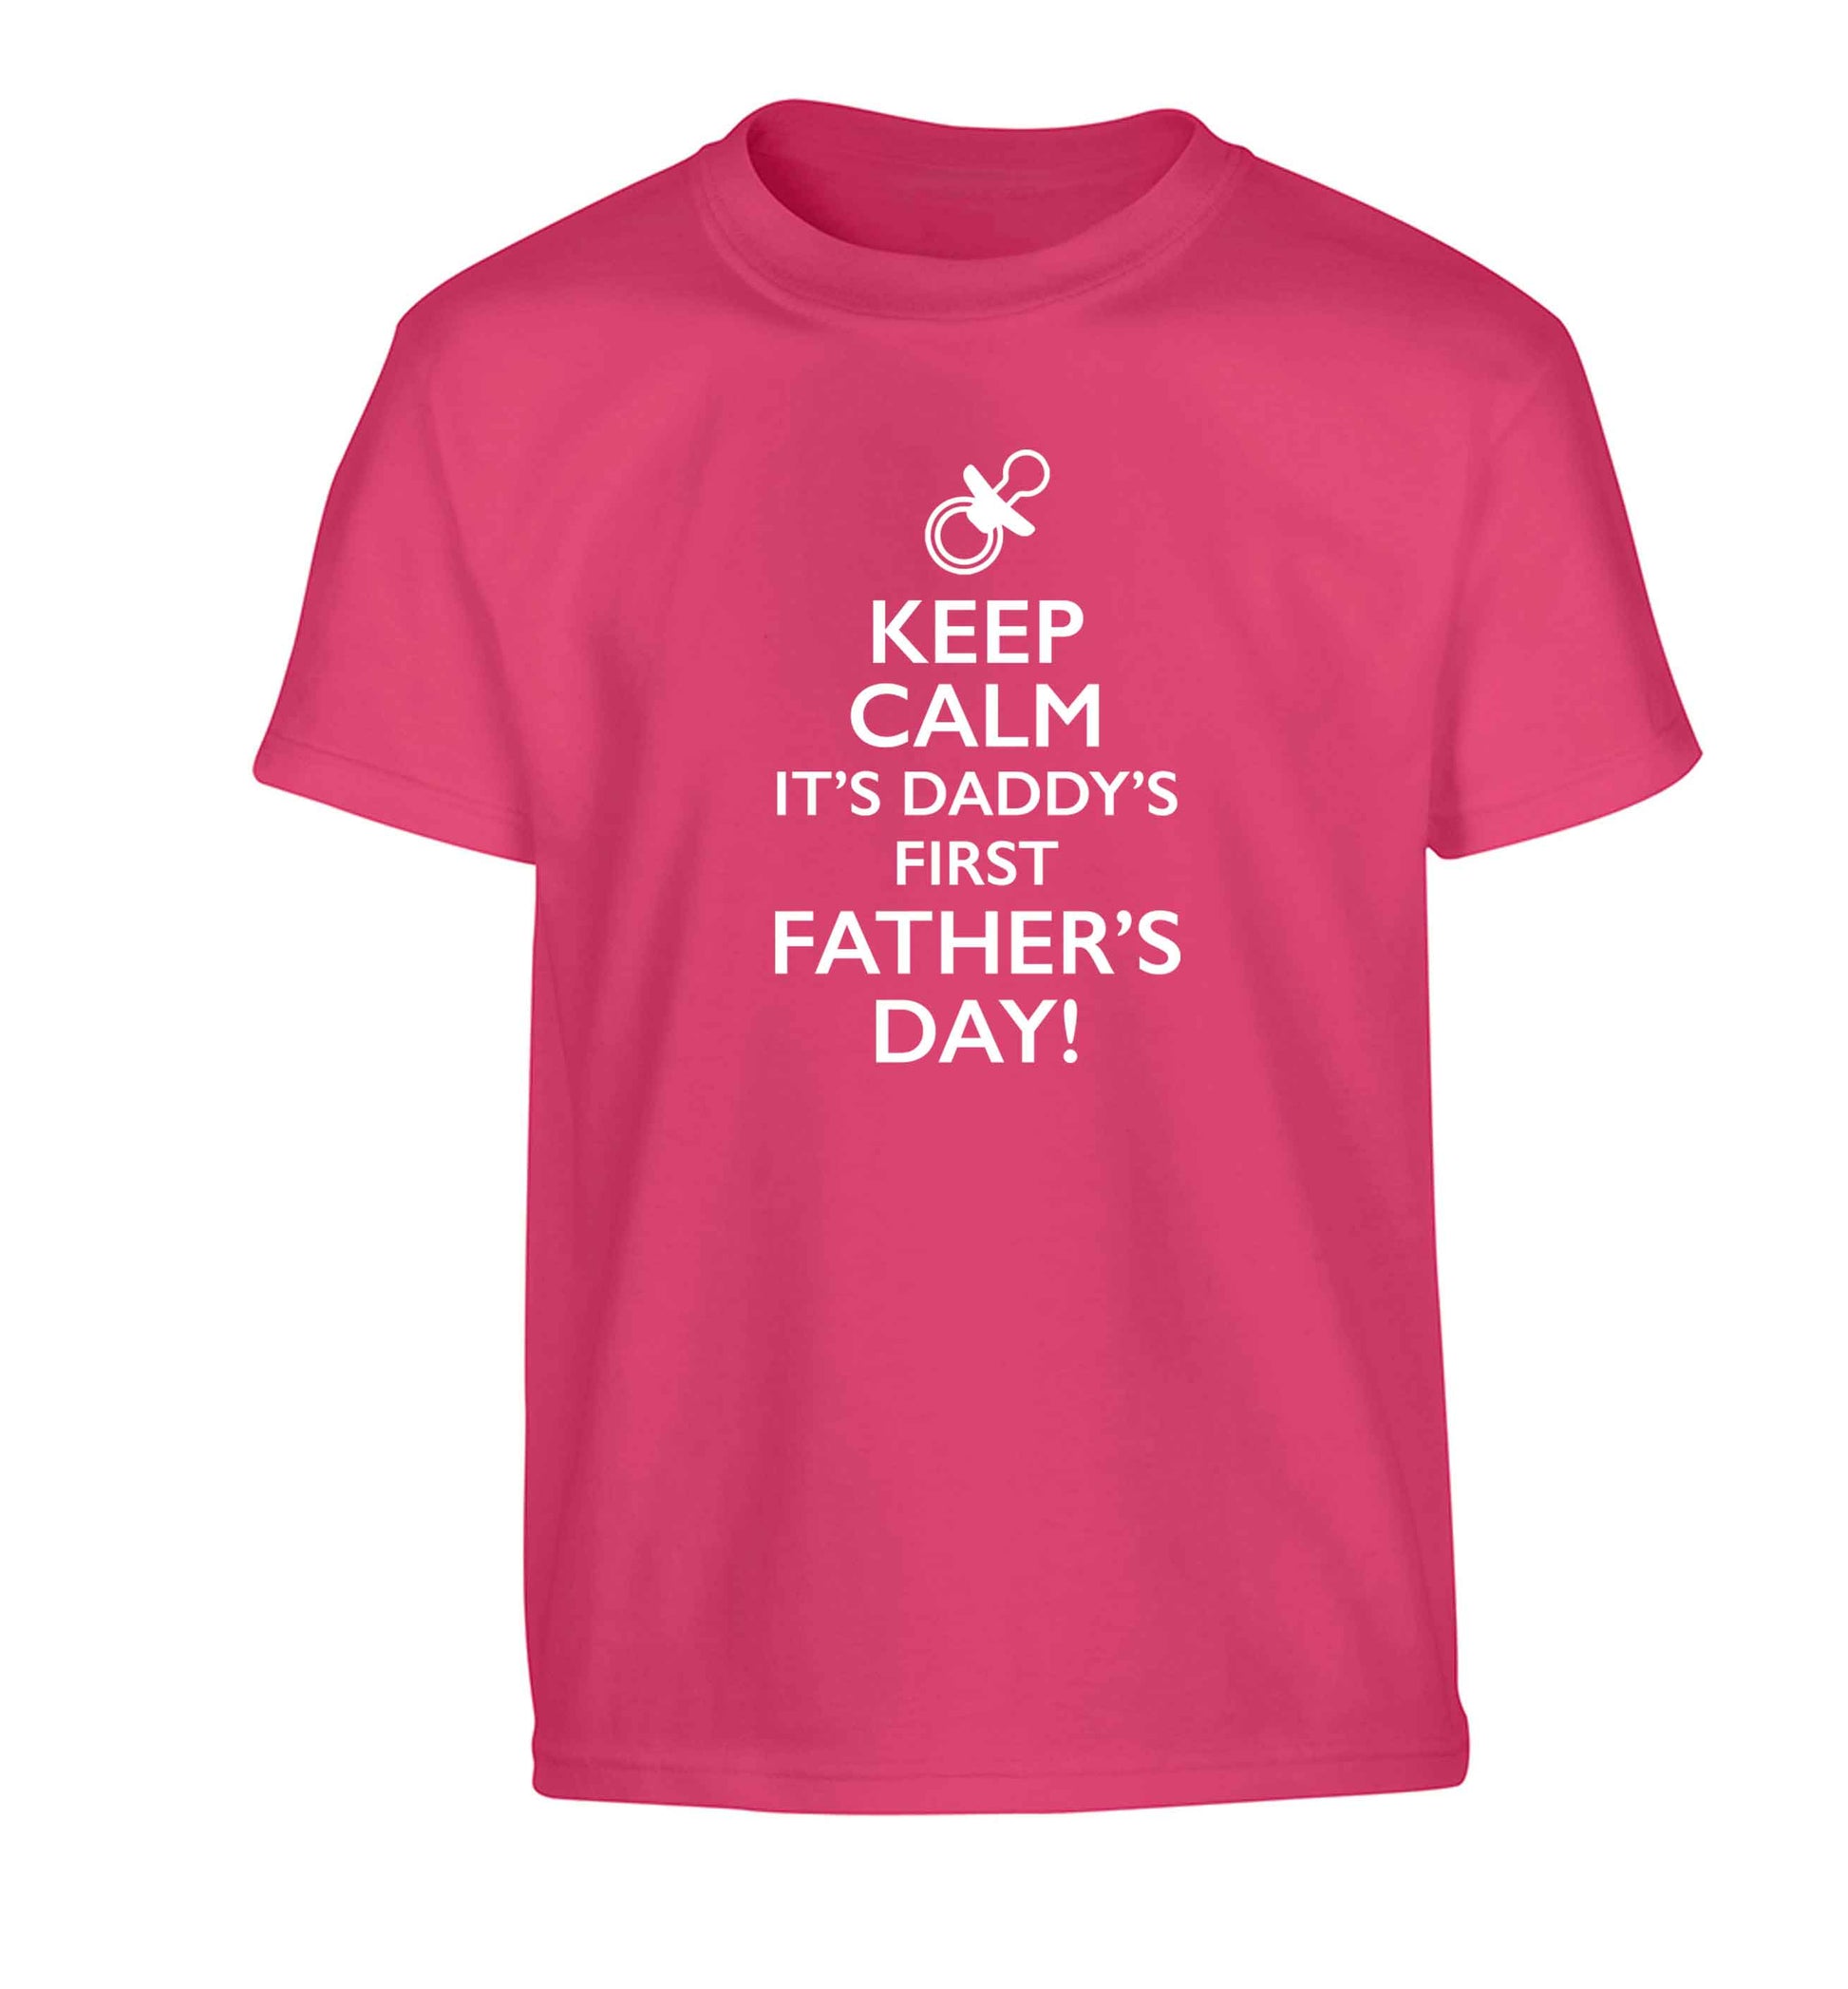 Keep calm it's daddys first father's day Children's pink Tshirt 12-13 Years